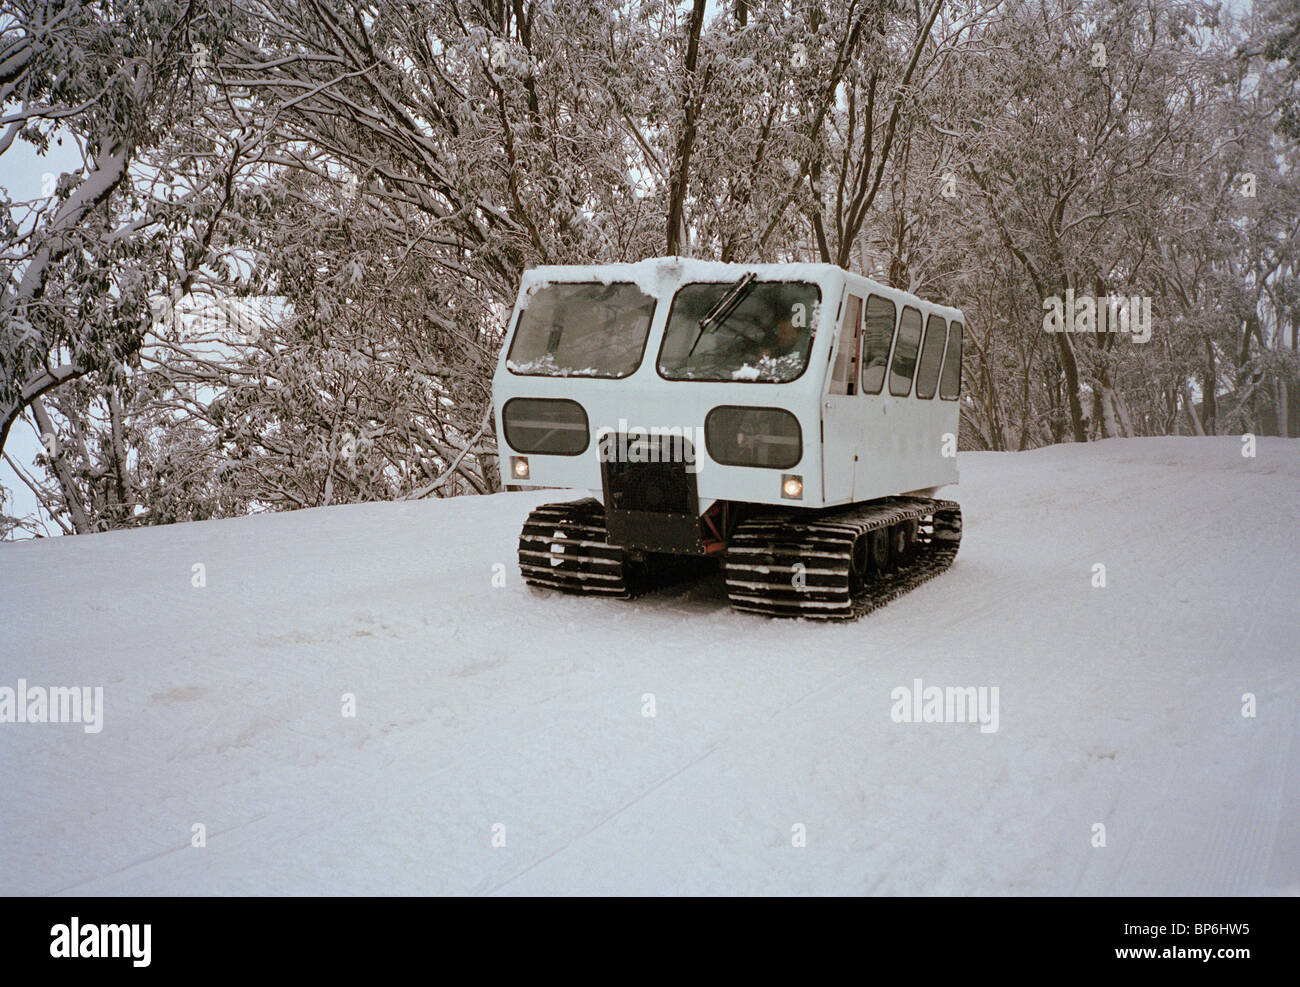 A tracked vehicle on a snowy road Stock Photo